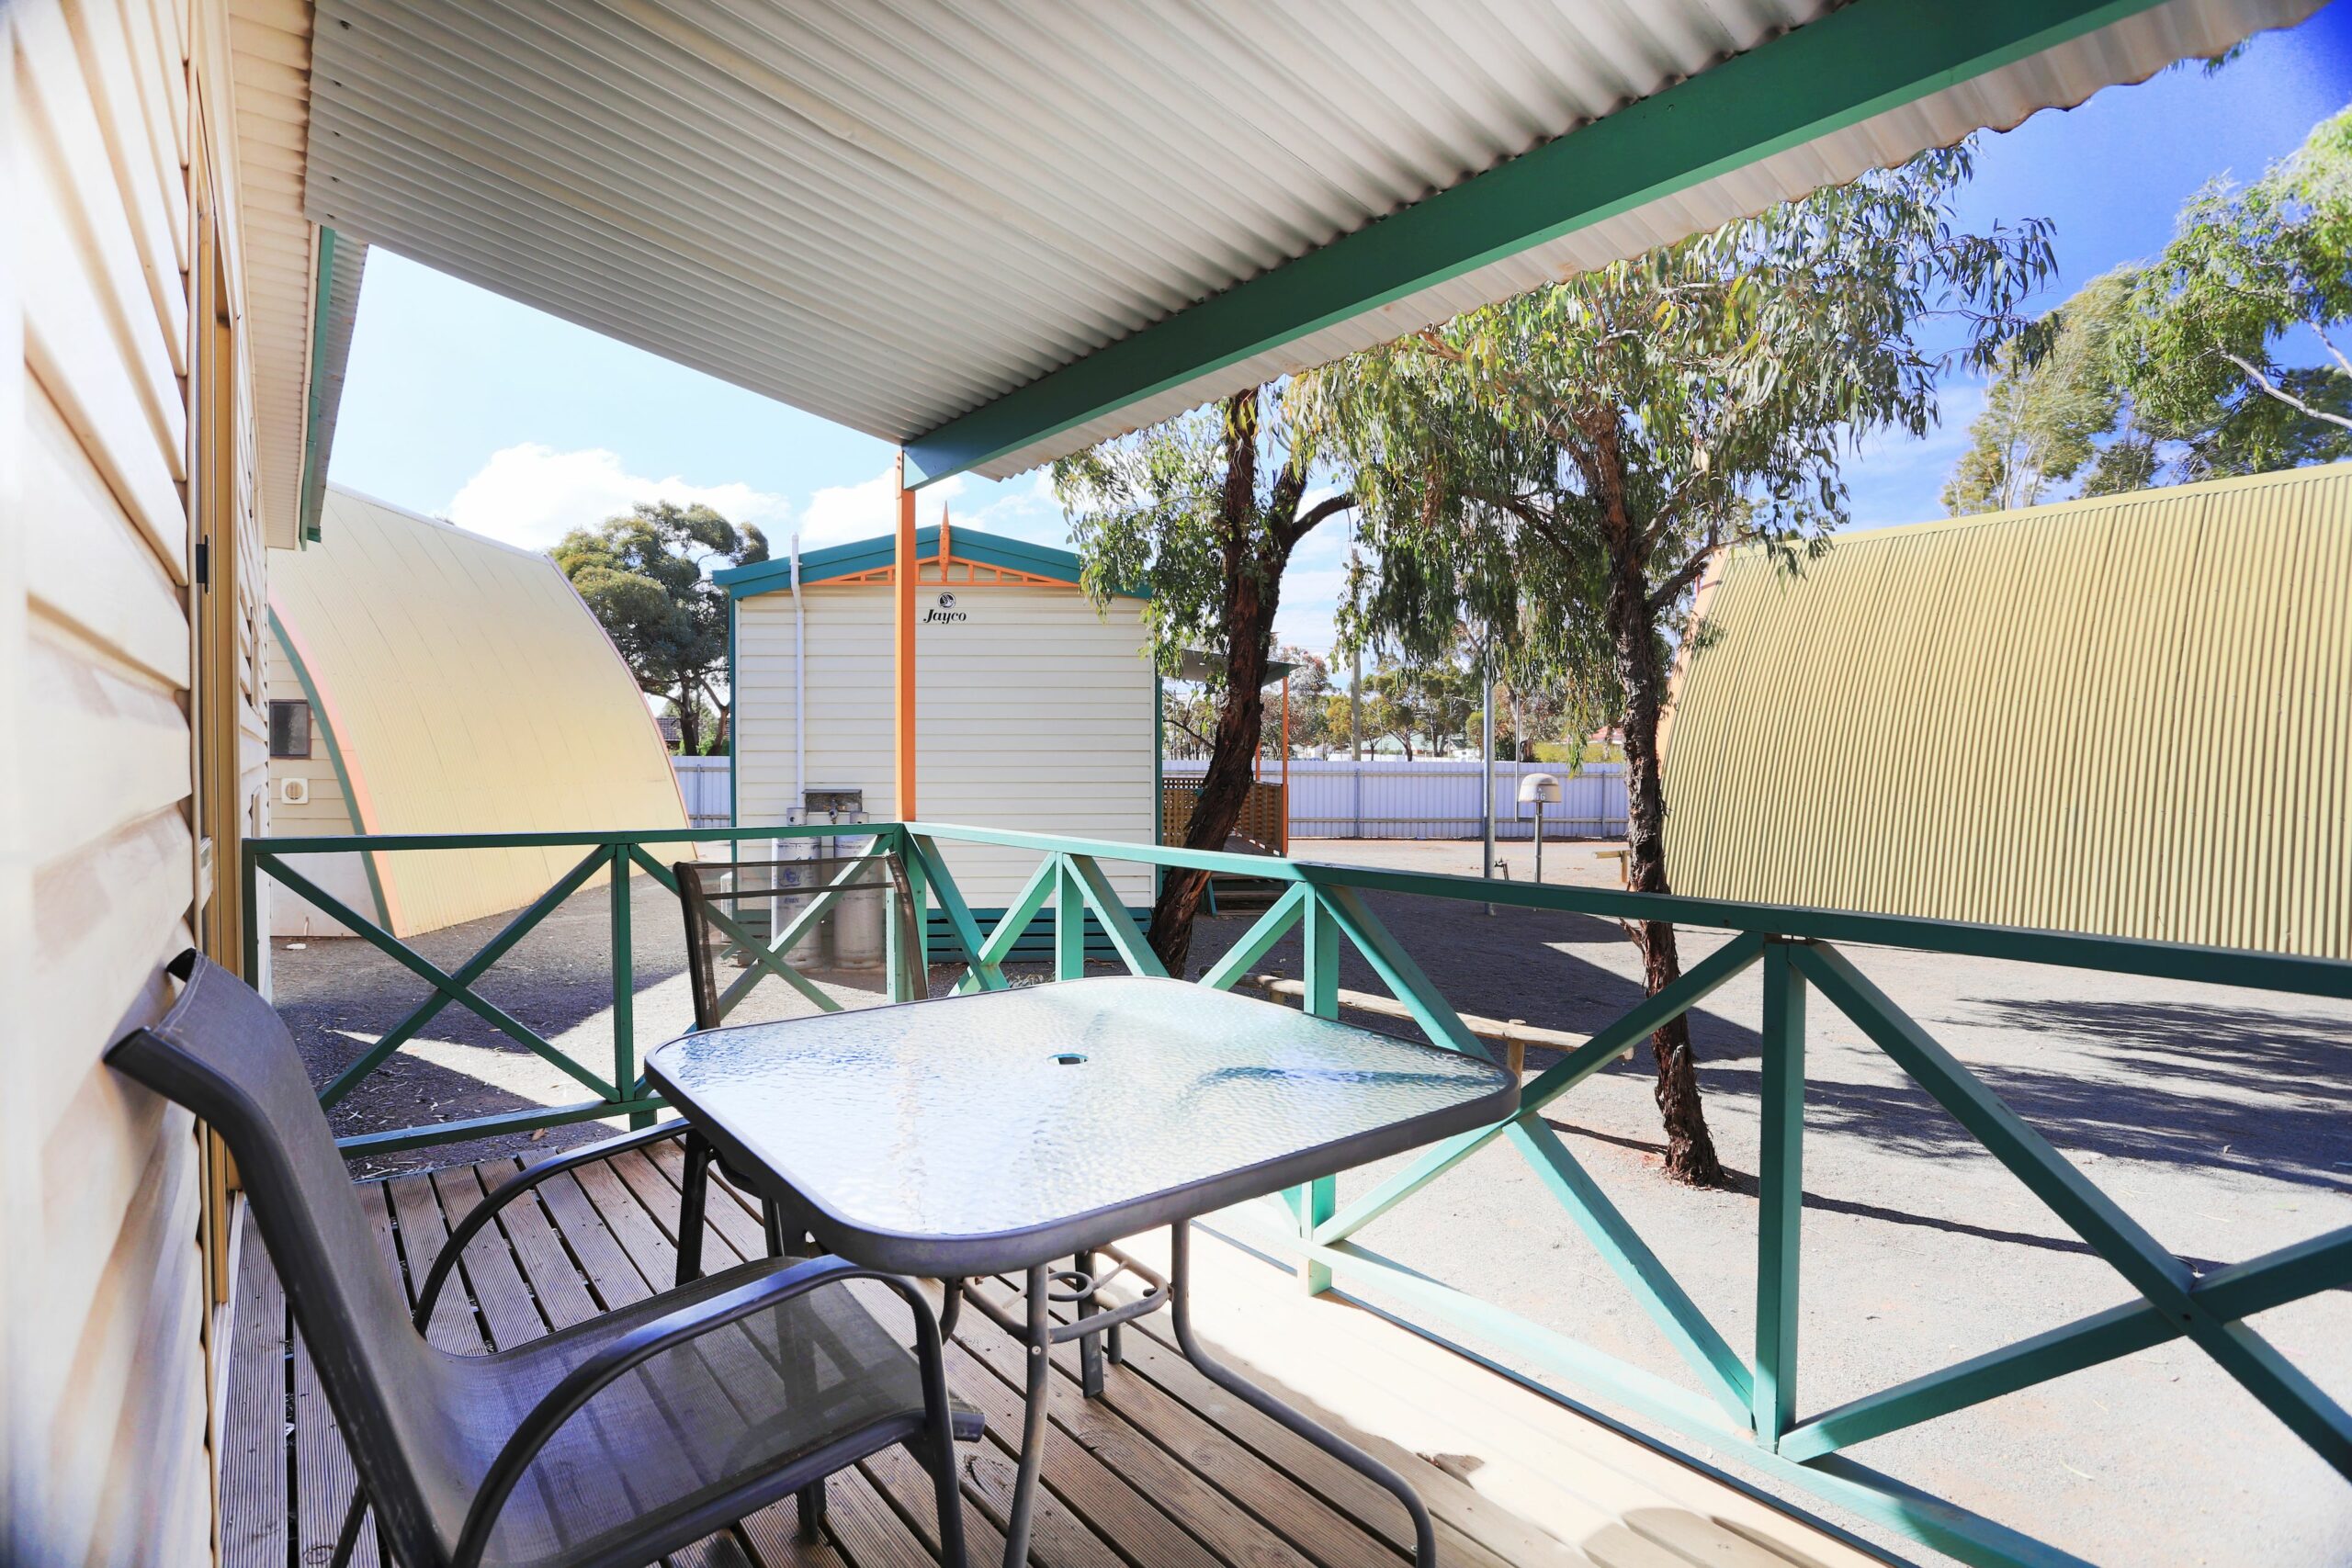 Discovery Parks - Kalgoorlie Goldfields